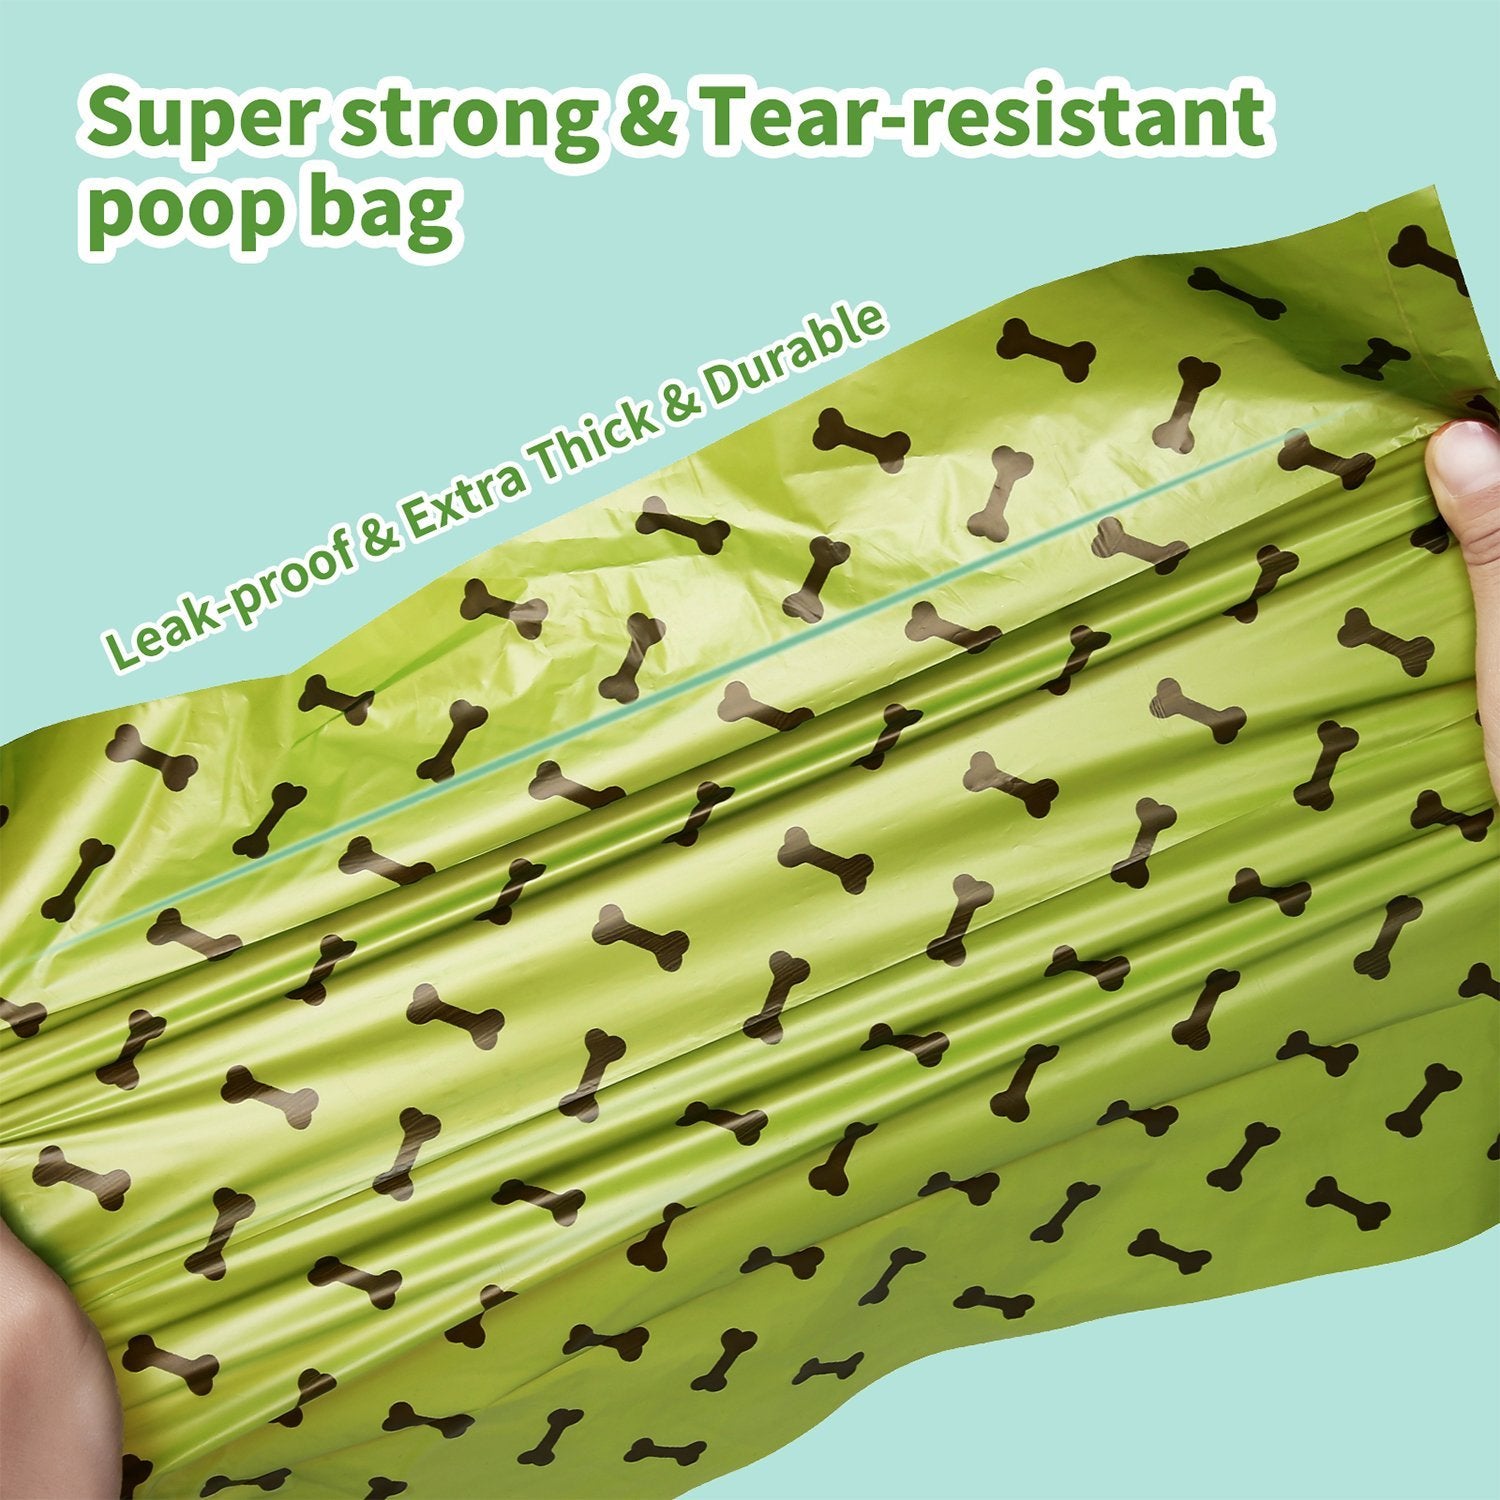 540 Dog Poop Bags Biodegradable Pets Waste Bag with Dispenser and Leash Clip for Dog Extra Thick 100% Leak Proof Bag Doggy Bags 36 Rolls 9